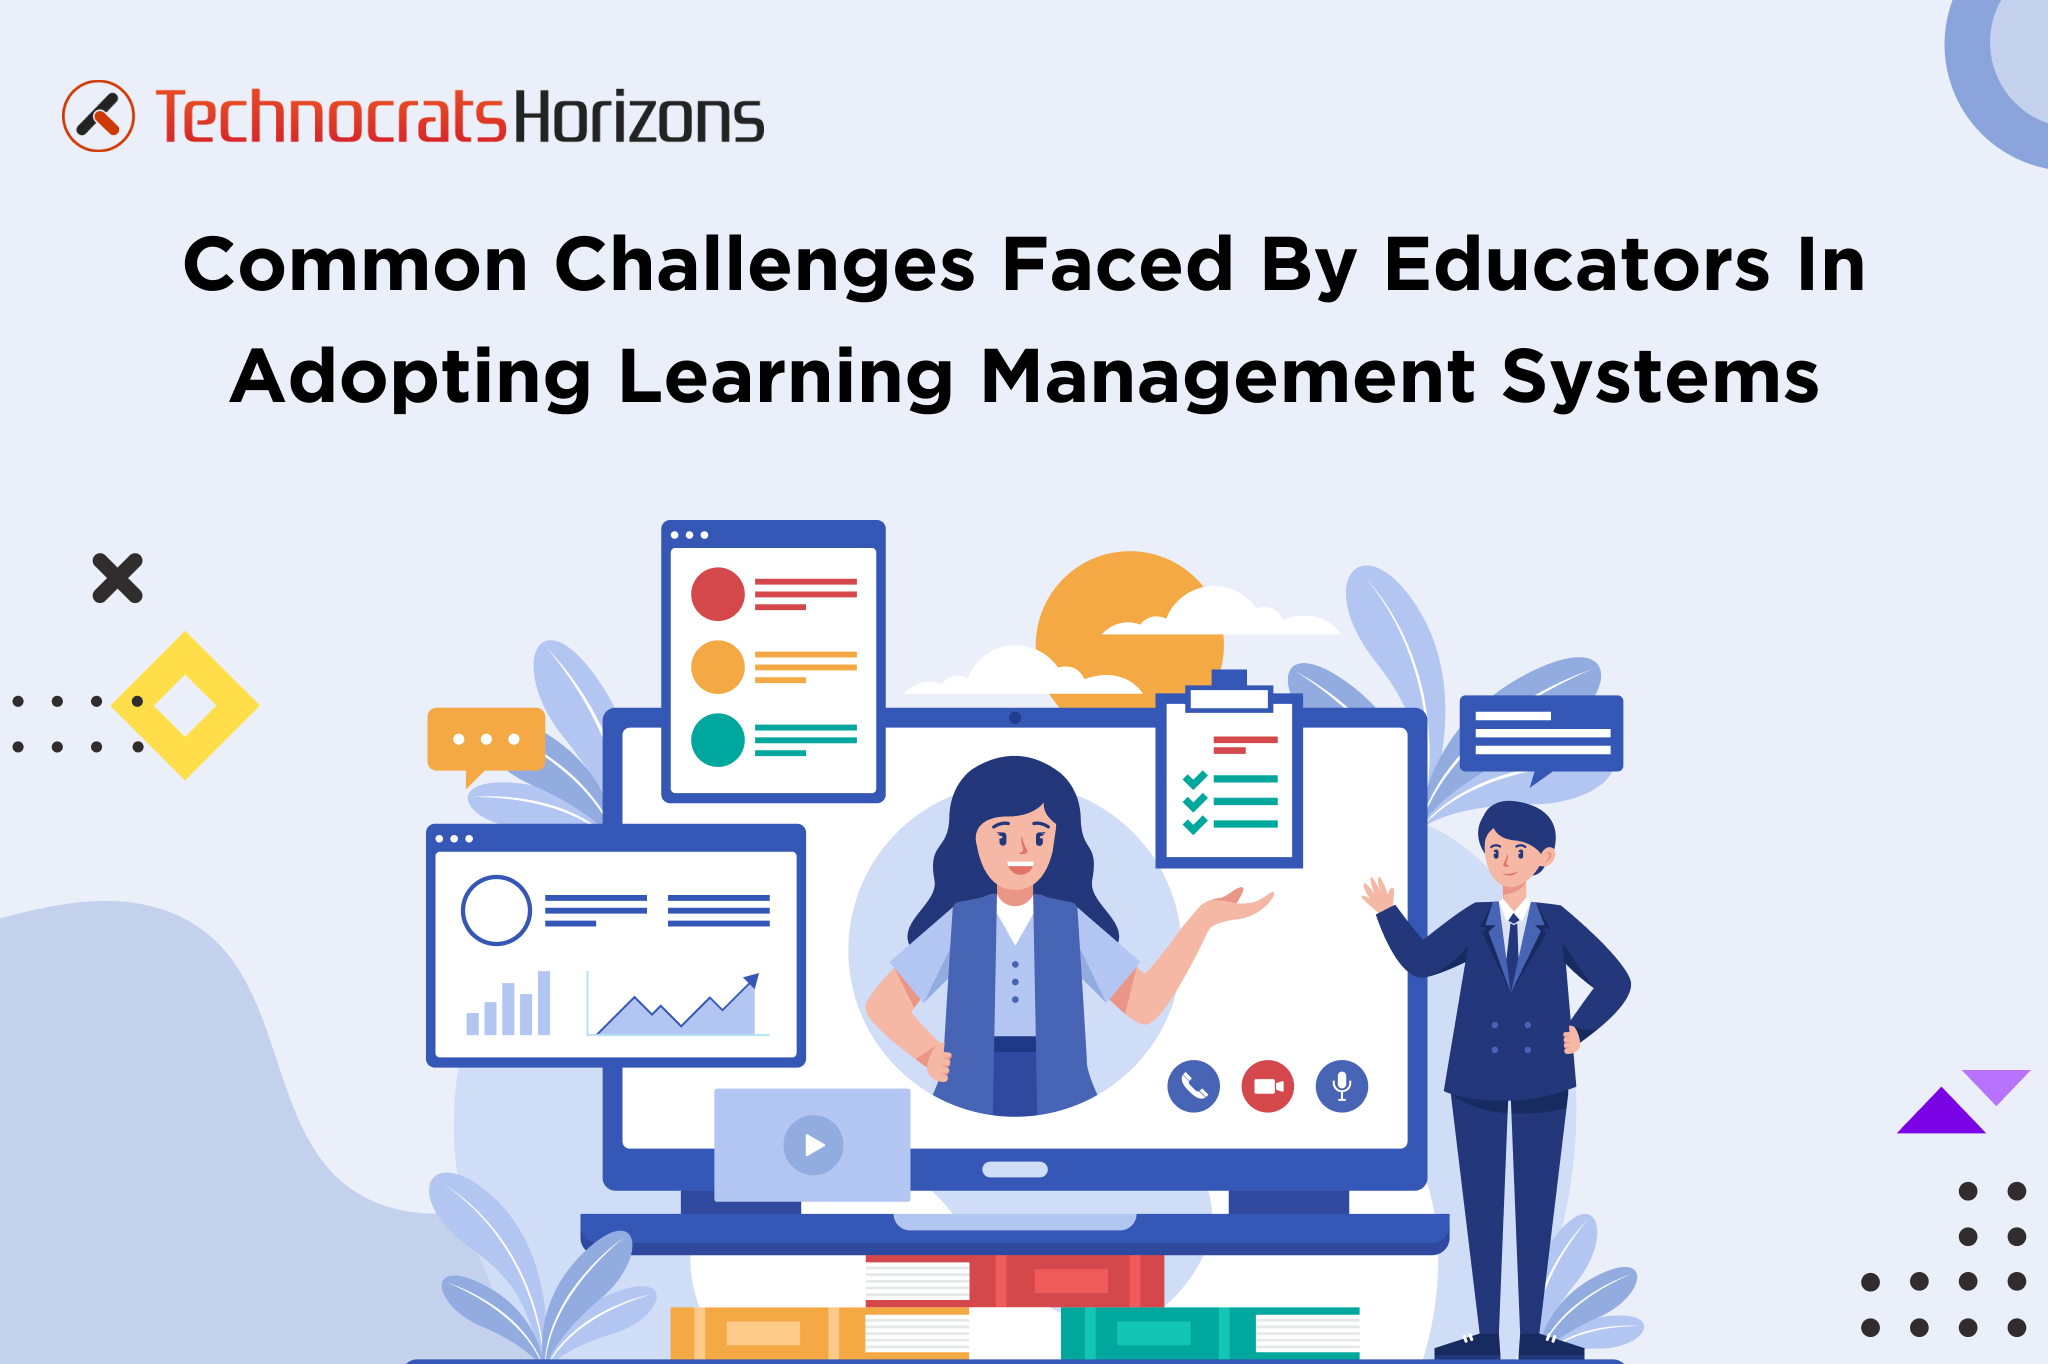 Common Challenges Faced by Educators in Adopting Learning Management Systems